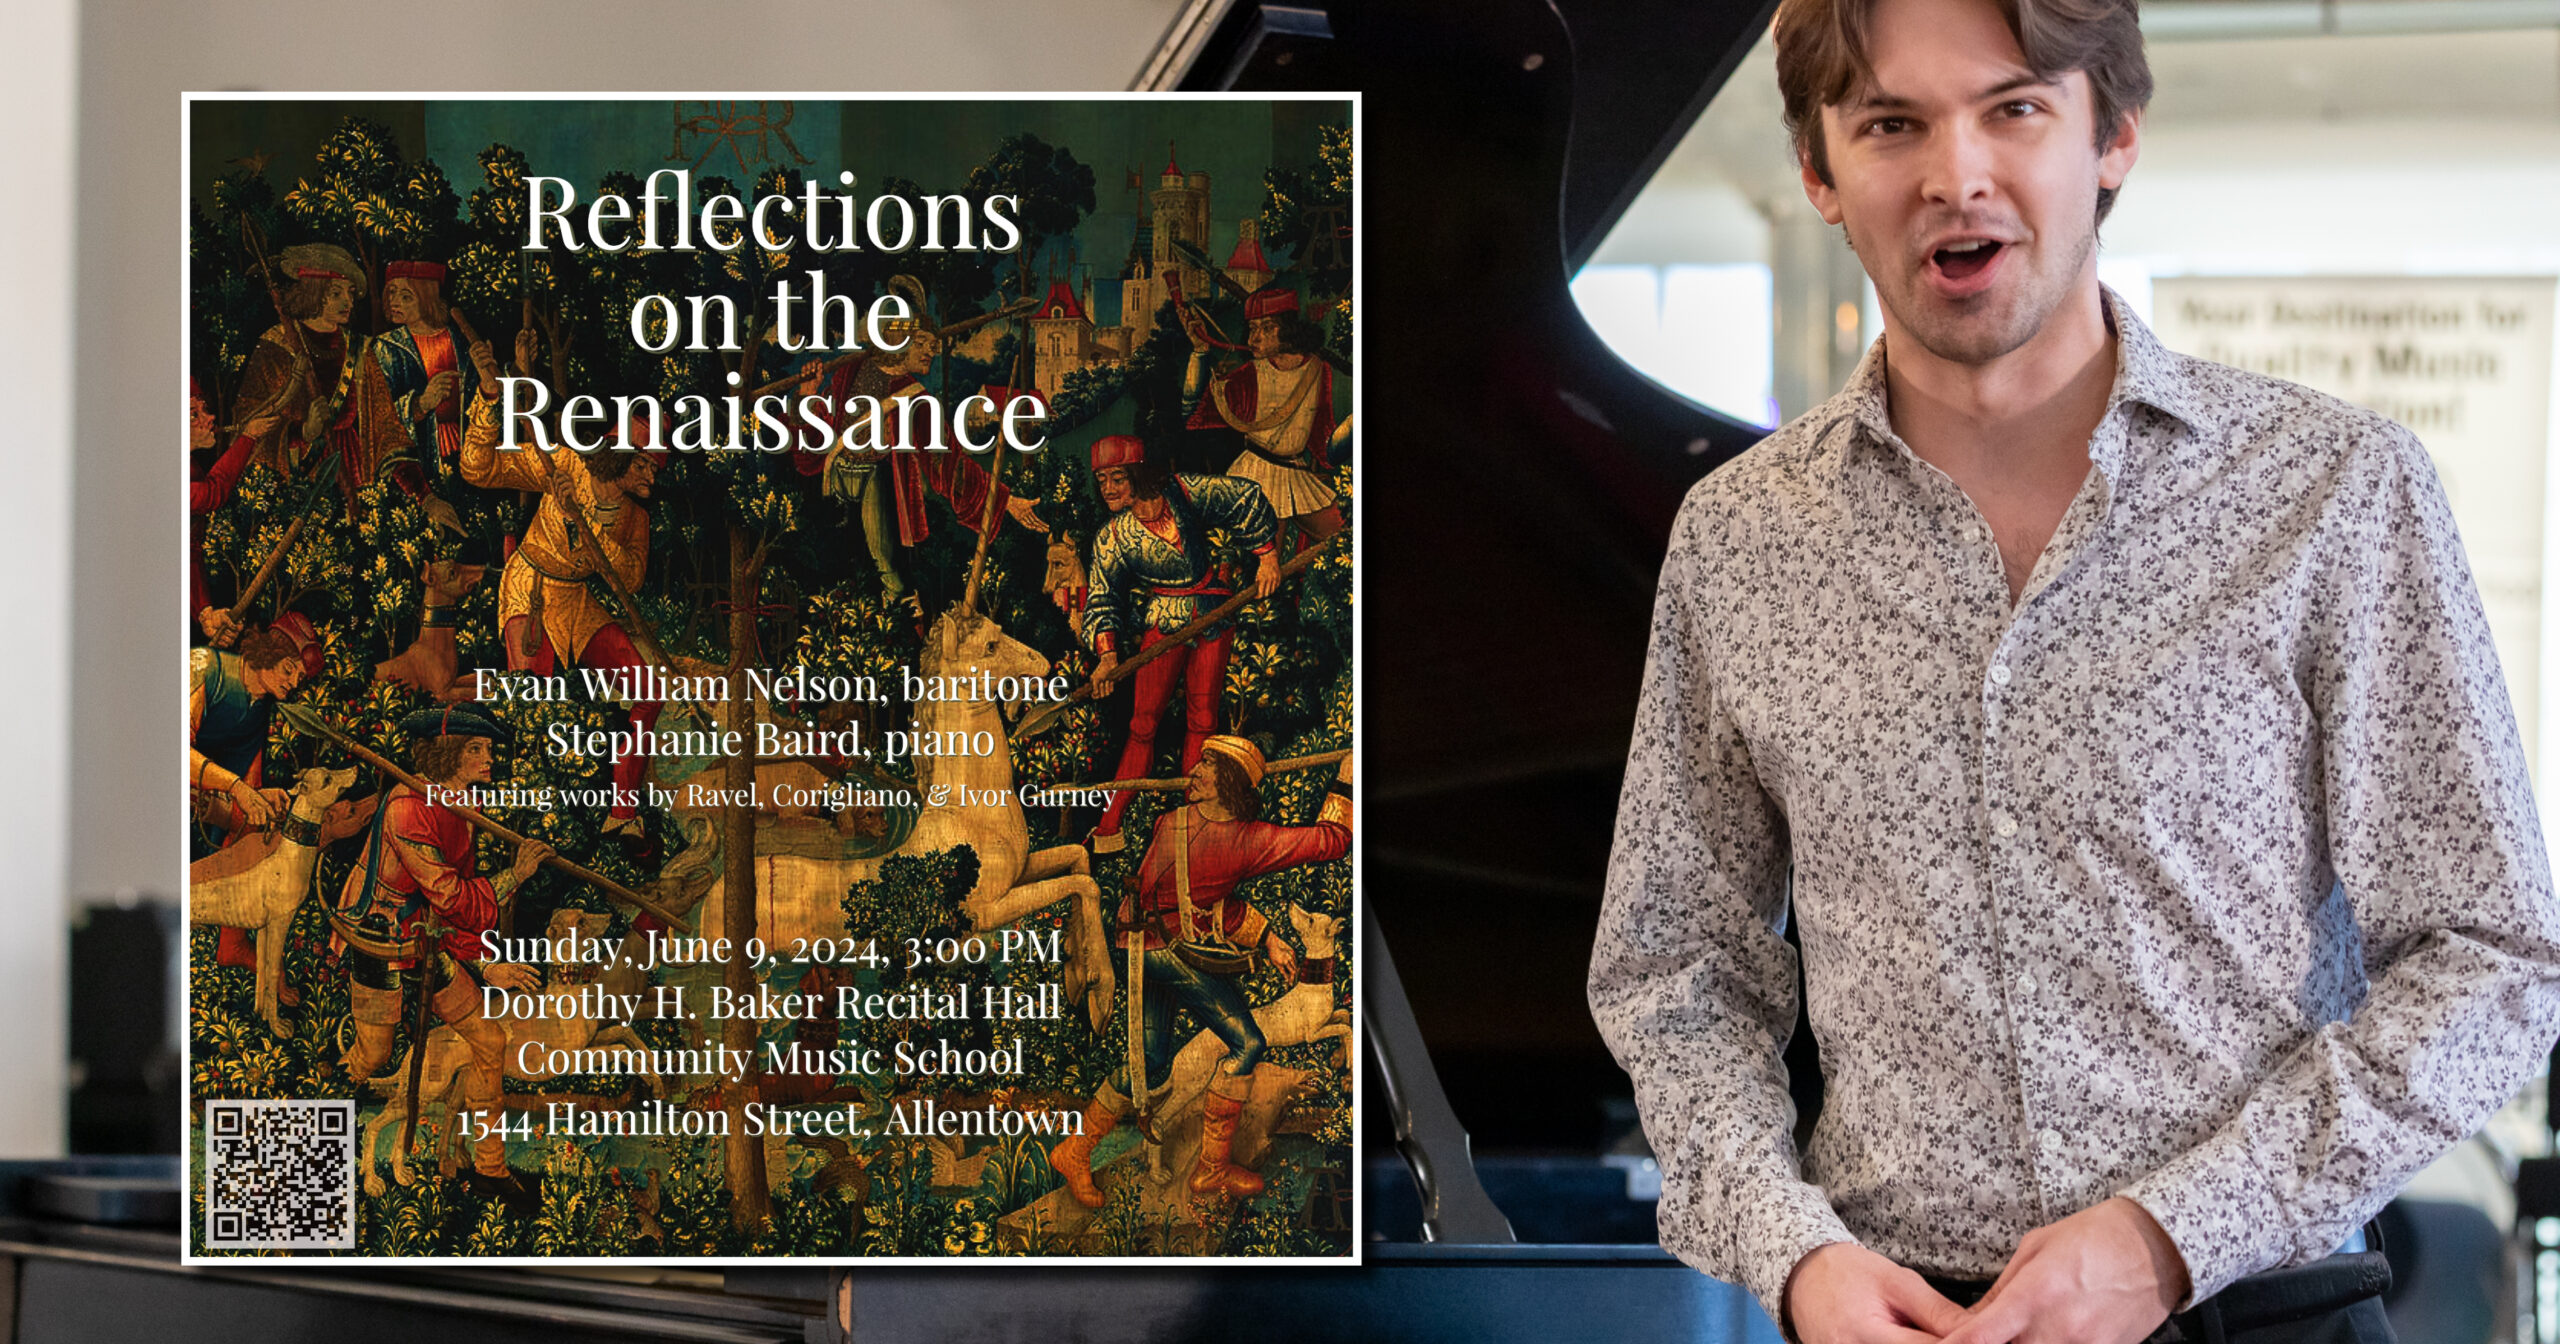 Reflections on the Renaissance - A recital by Evan William Nelson, voice, and Stephanie Baird, piano at Community Music School on Sunday, June 9, at 3:00 PM